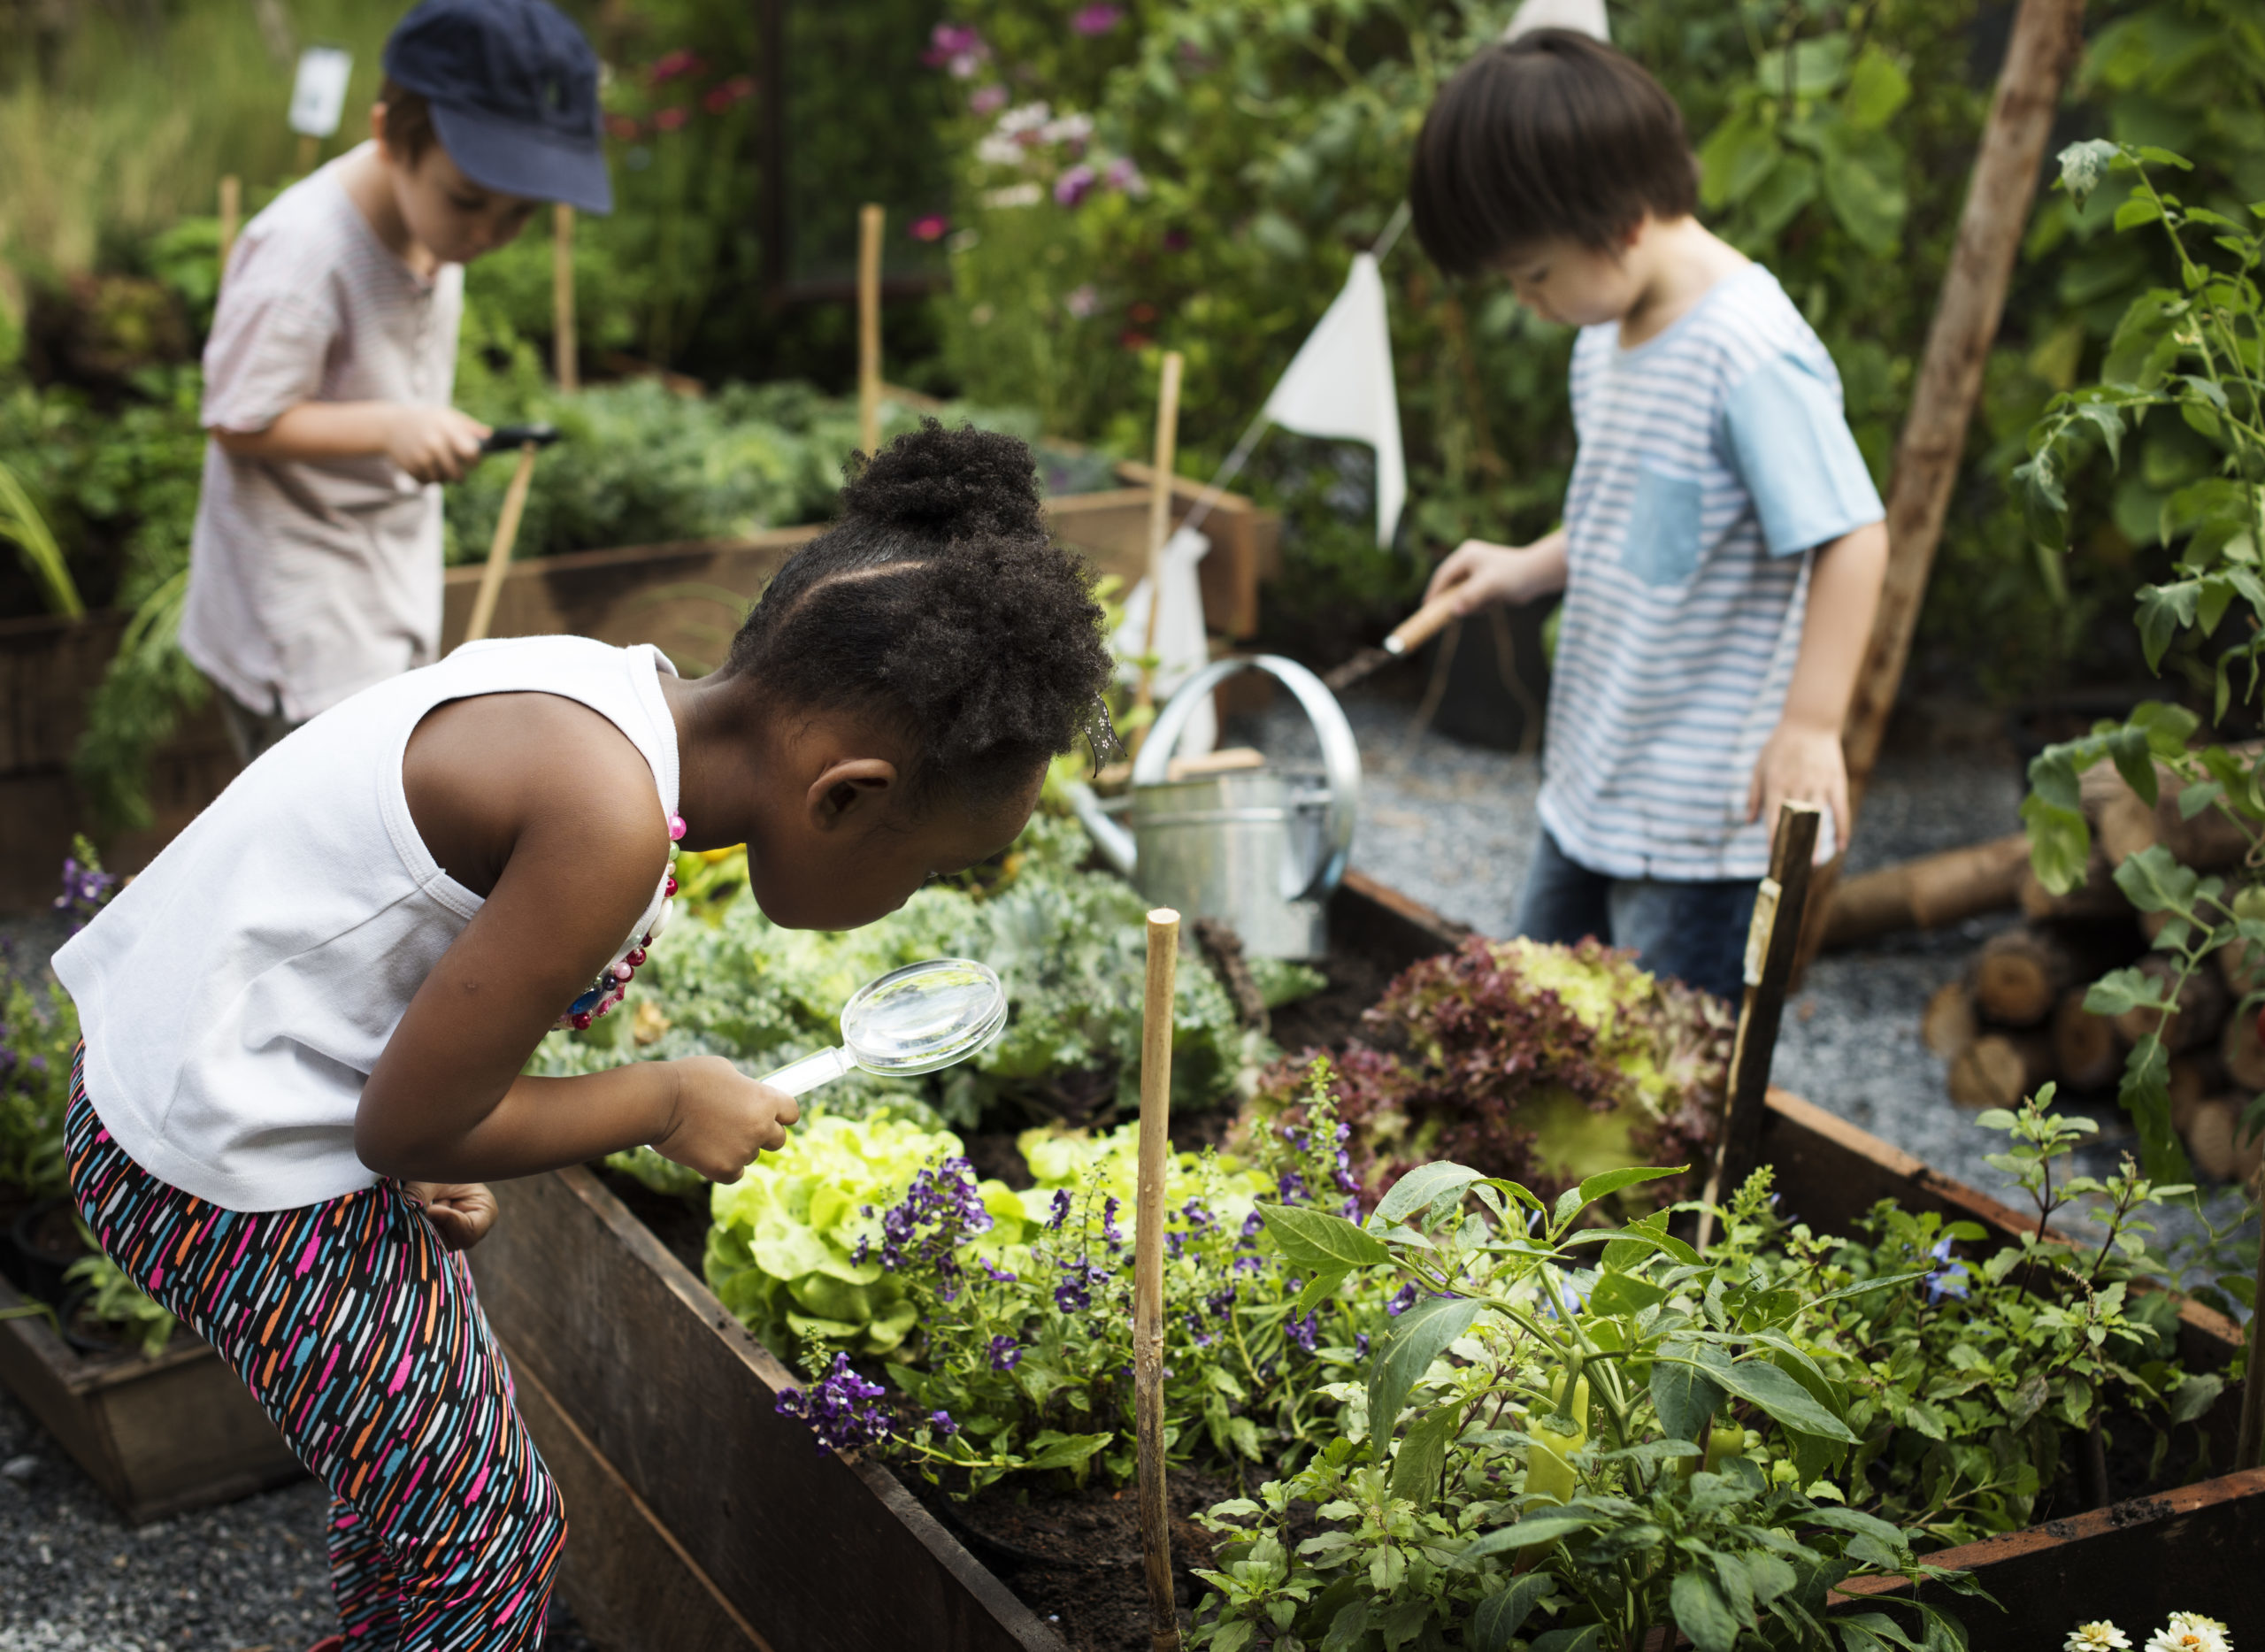 Students tend to a shared classroom vegetable garden